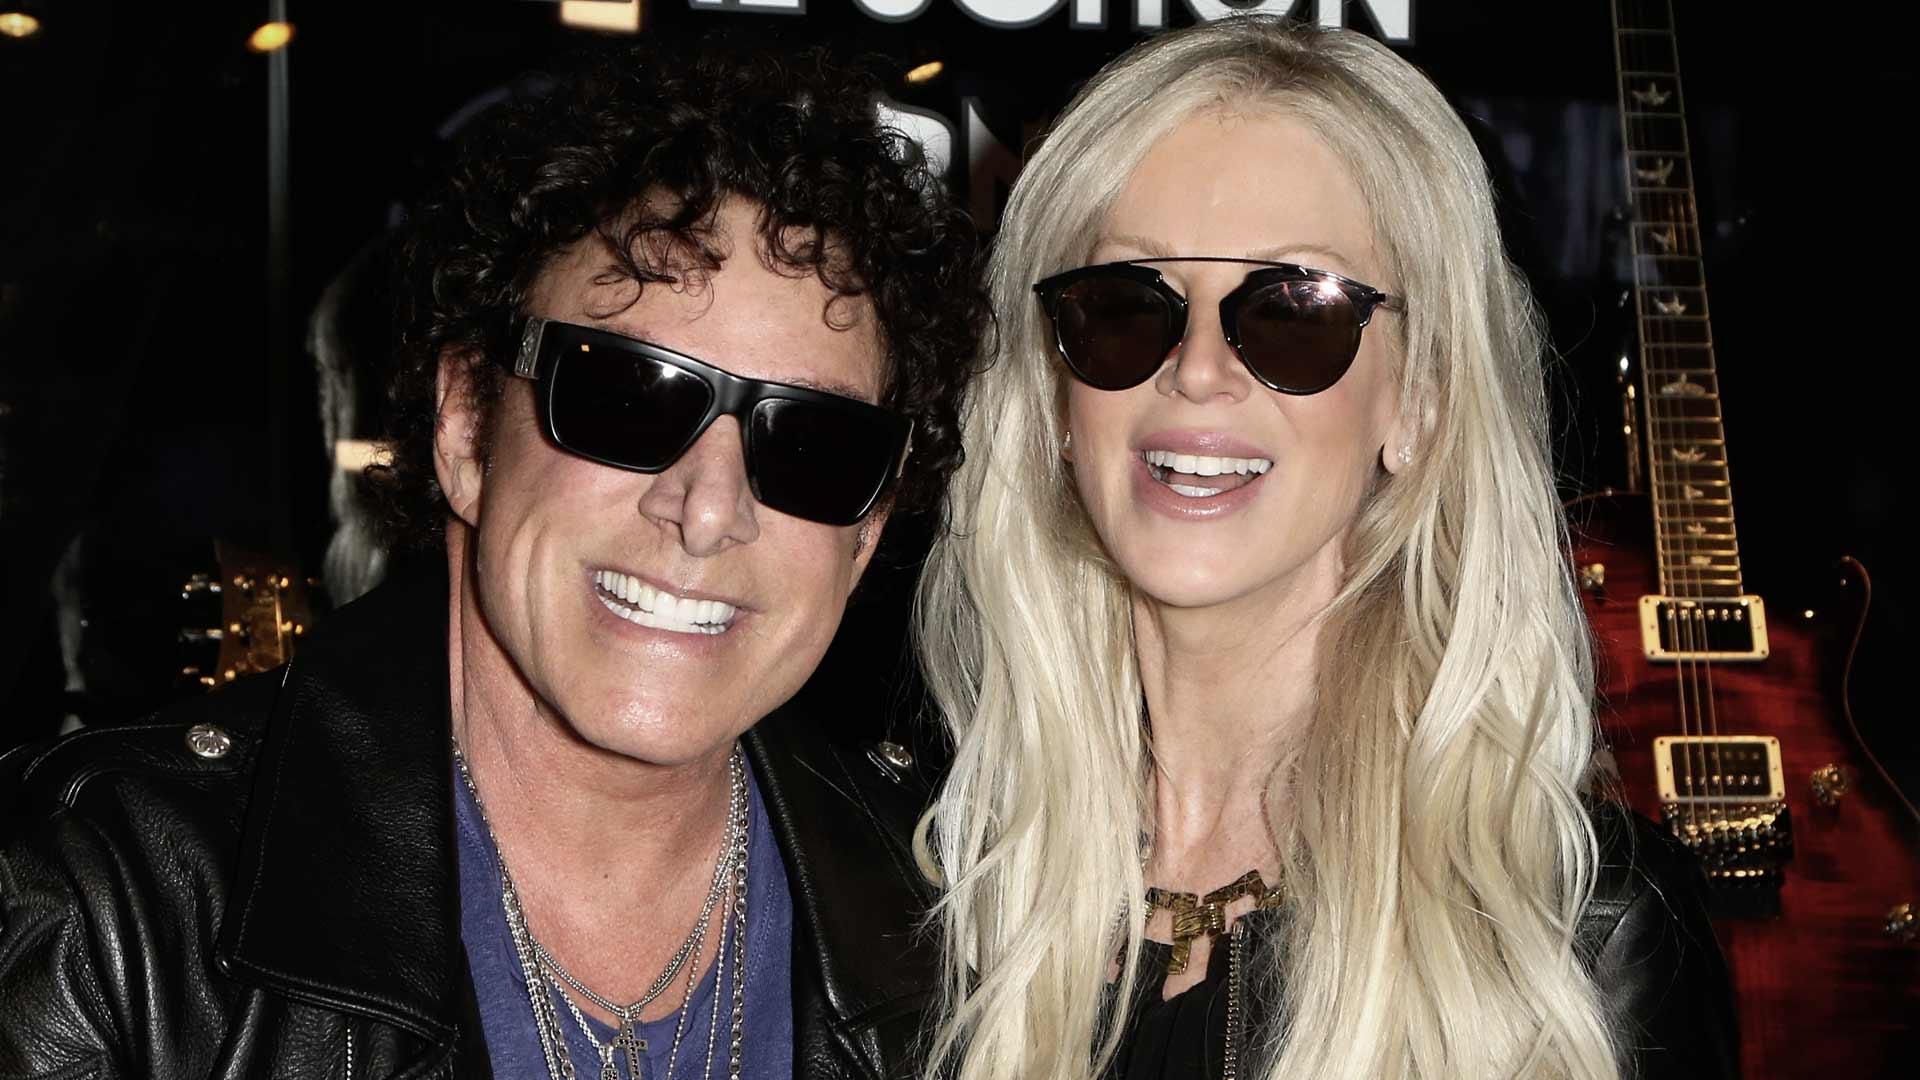 Journey’s Neal Schon Sues Live Nation, Claims Security Guard Assaulted Wife